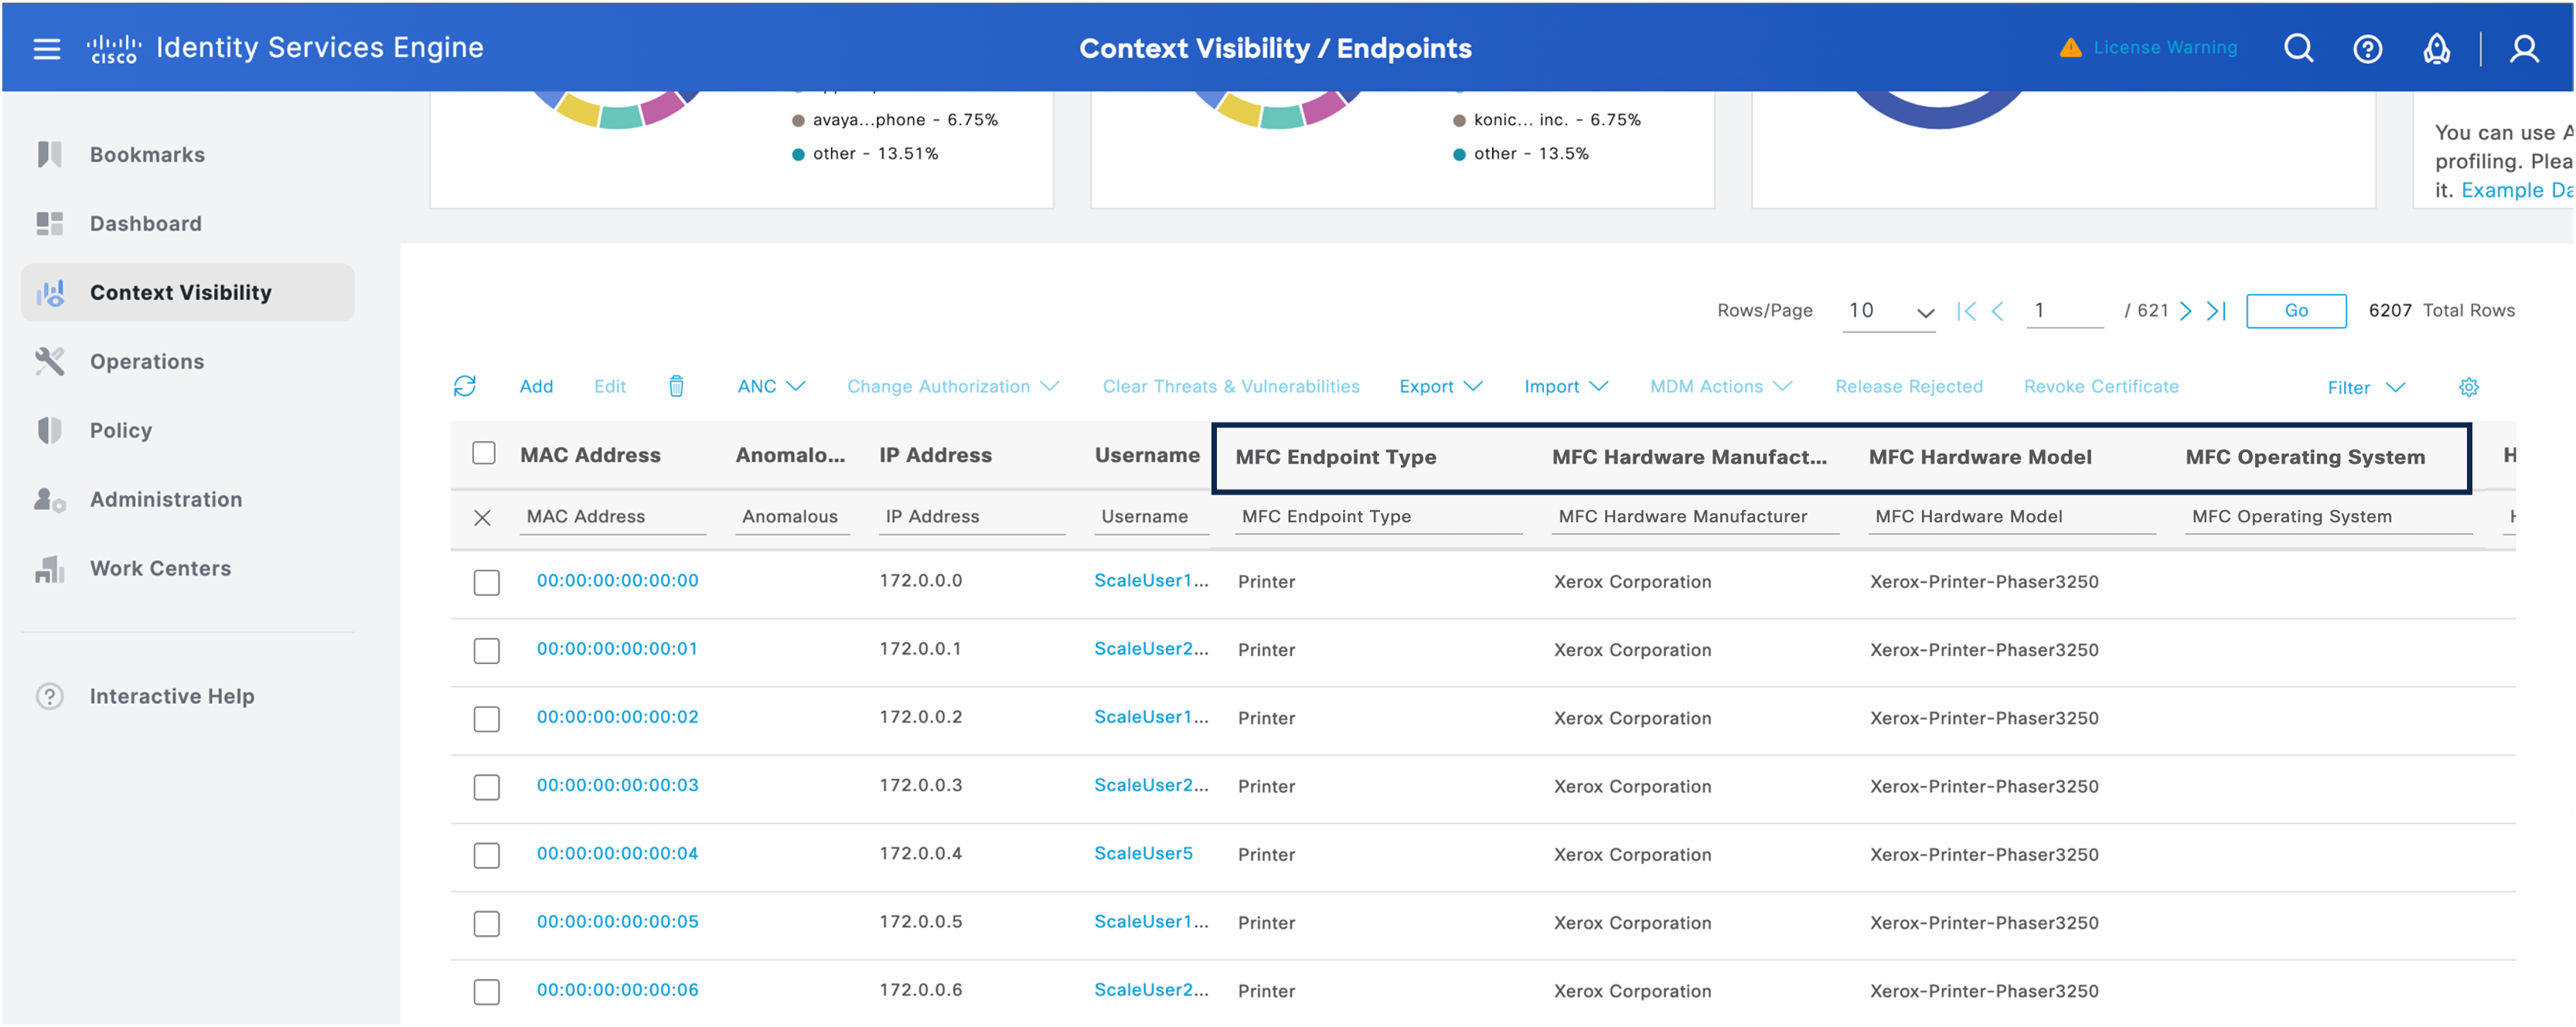 Multi-Factor Classification Endpoint Attributes in Context Visibility > Endpoints Window